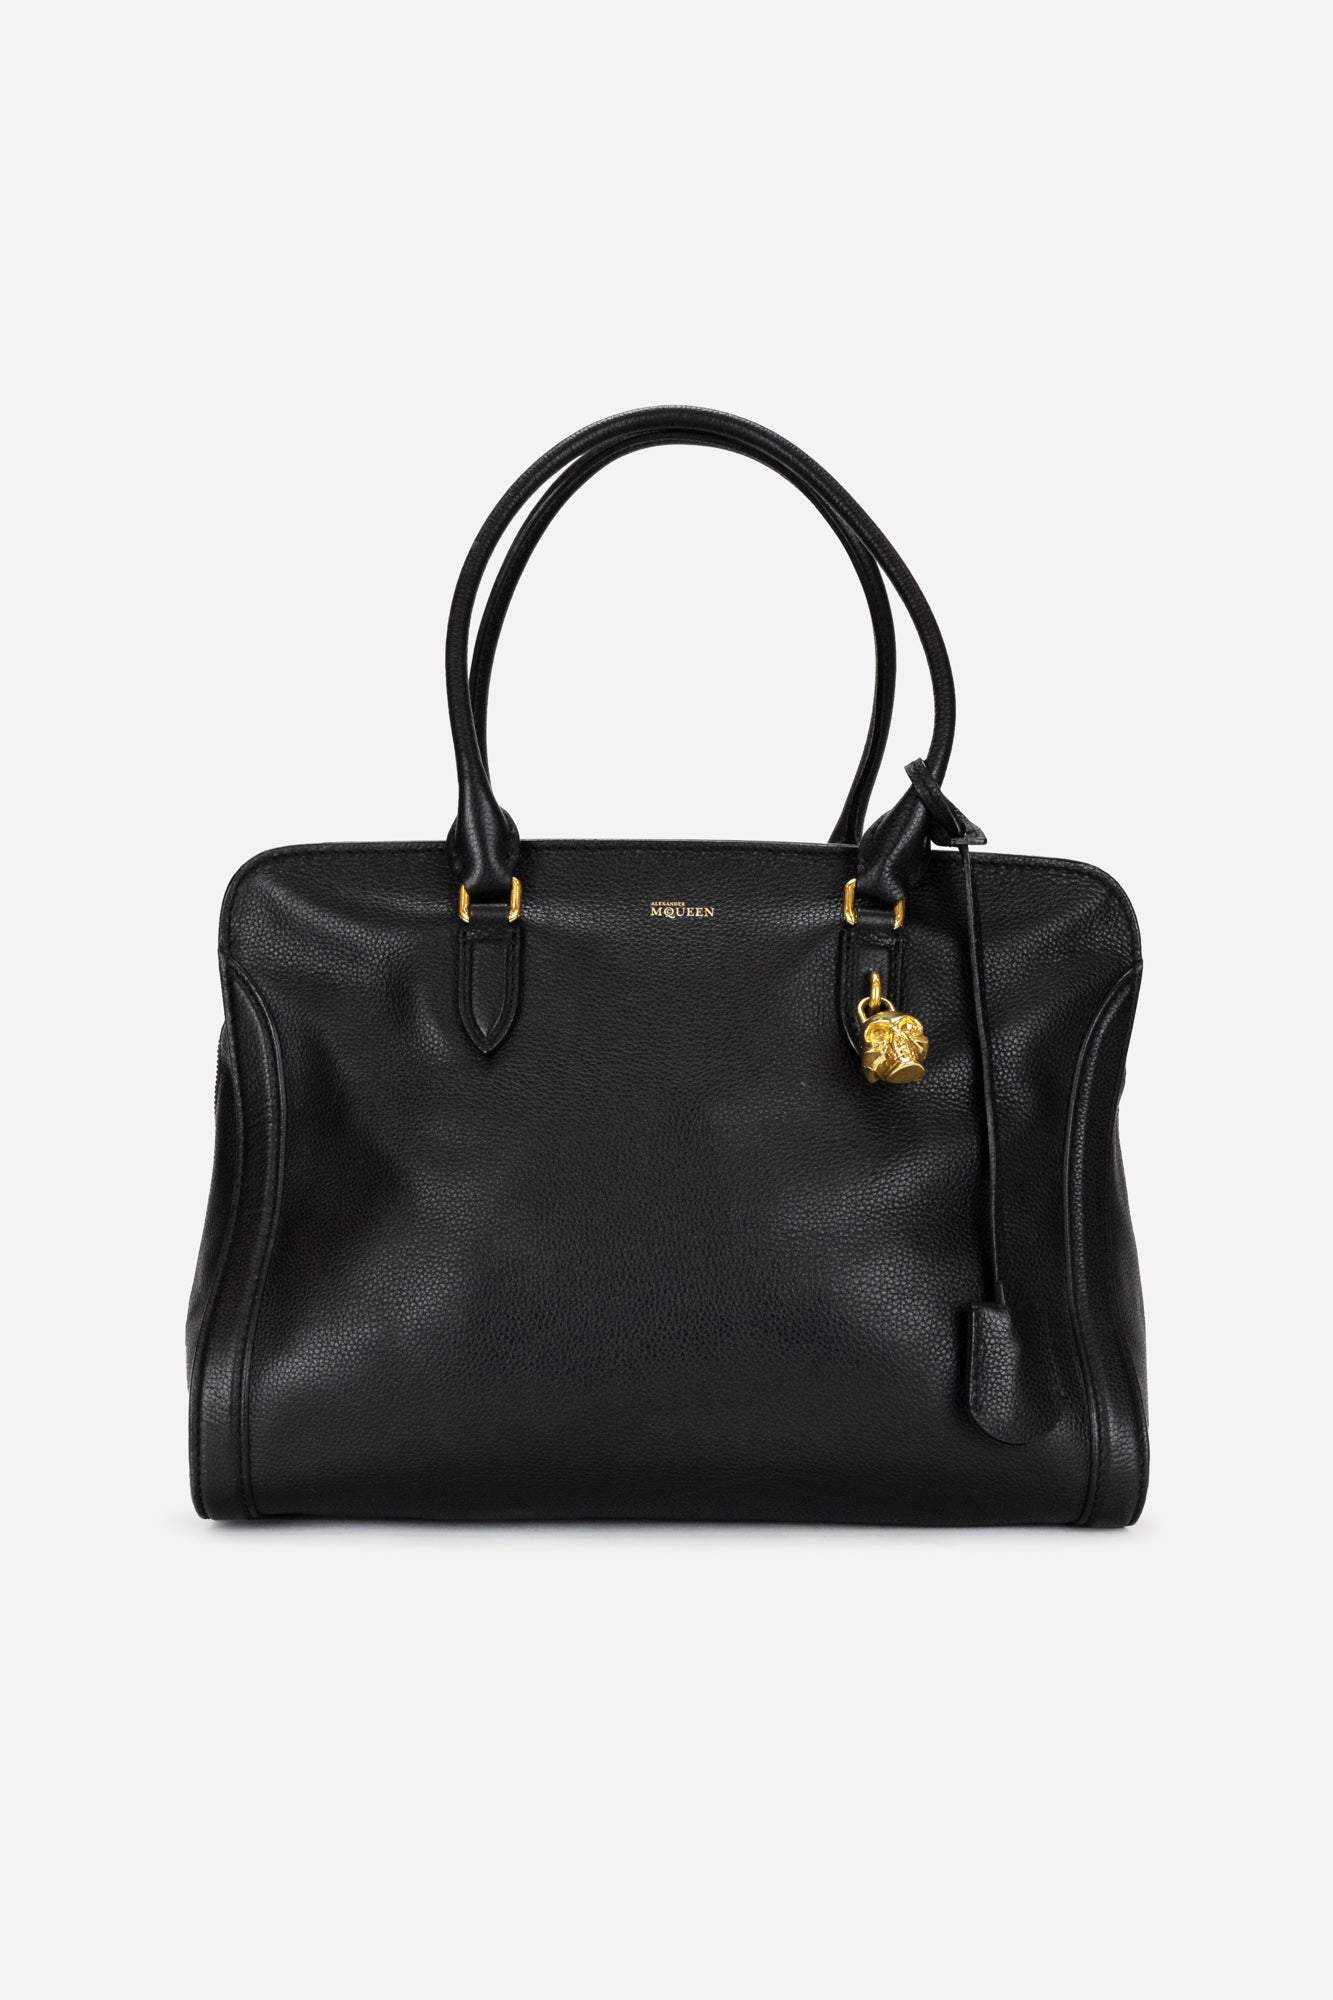 Black Grained Leather Padlock Tote  Length: 12" Width: 7" Height: 8.5"